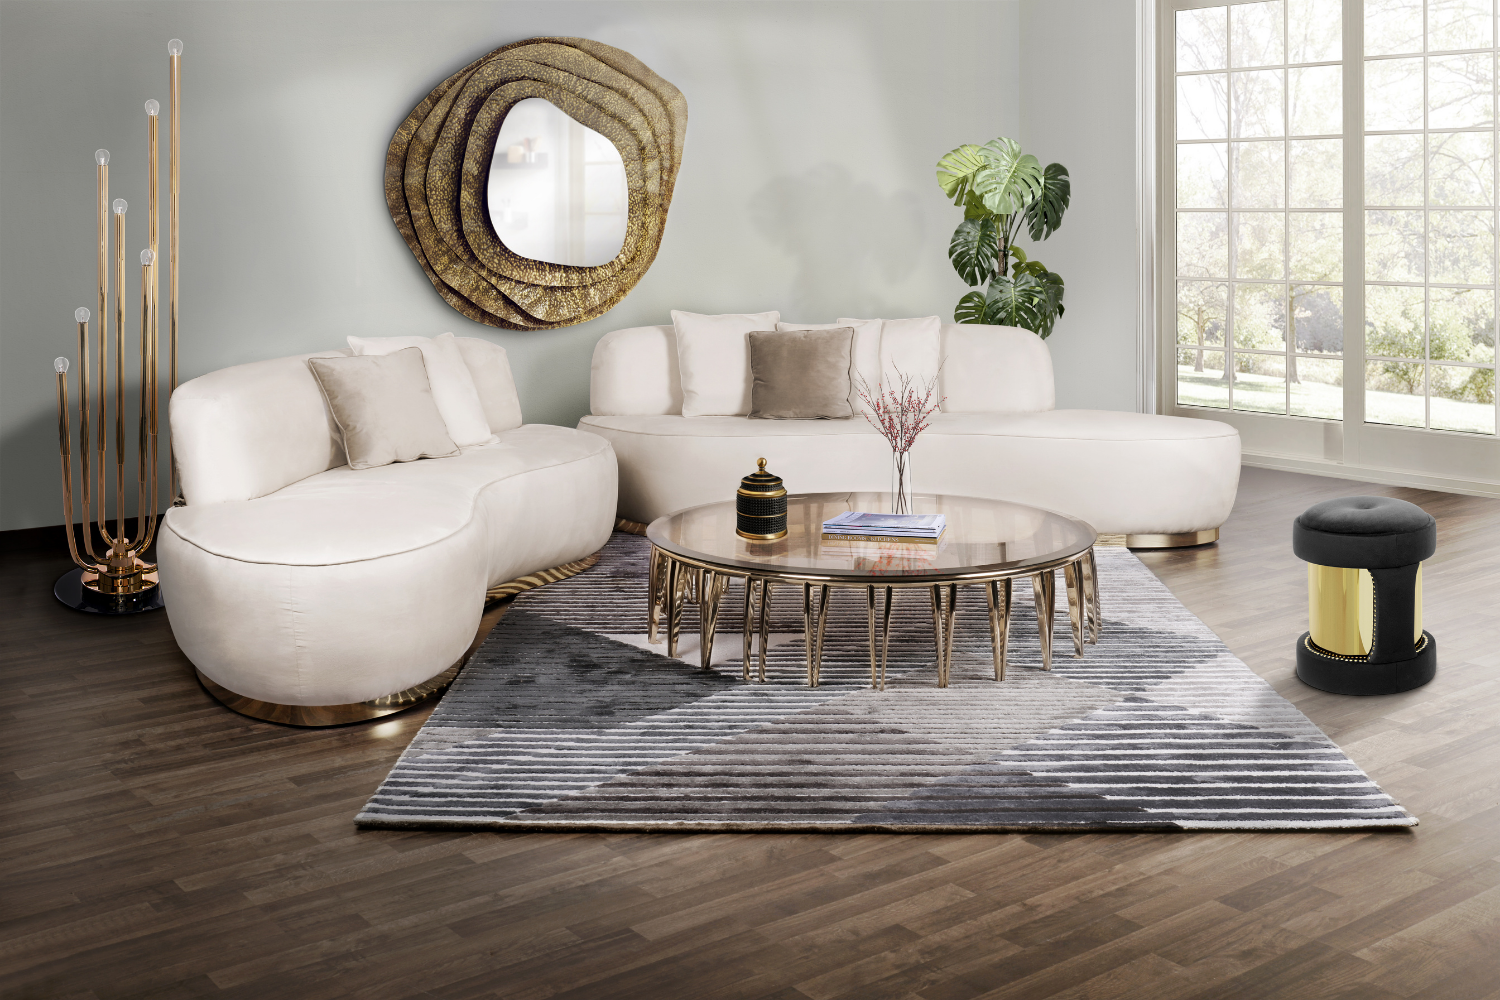 White couch grey rug gold mirror glass mirror coffee table